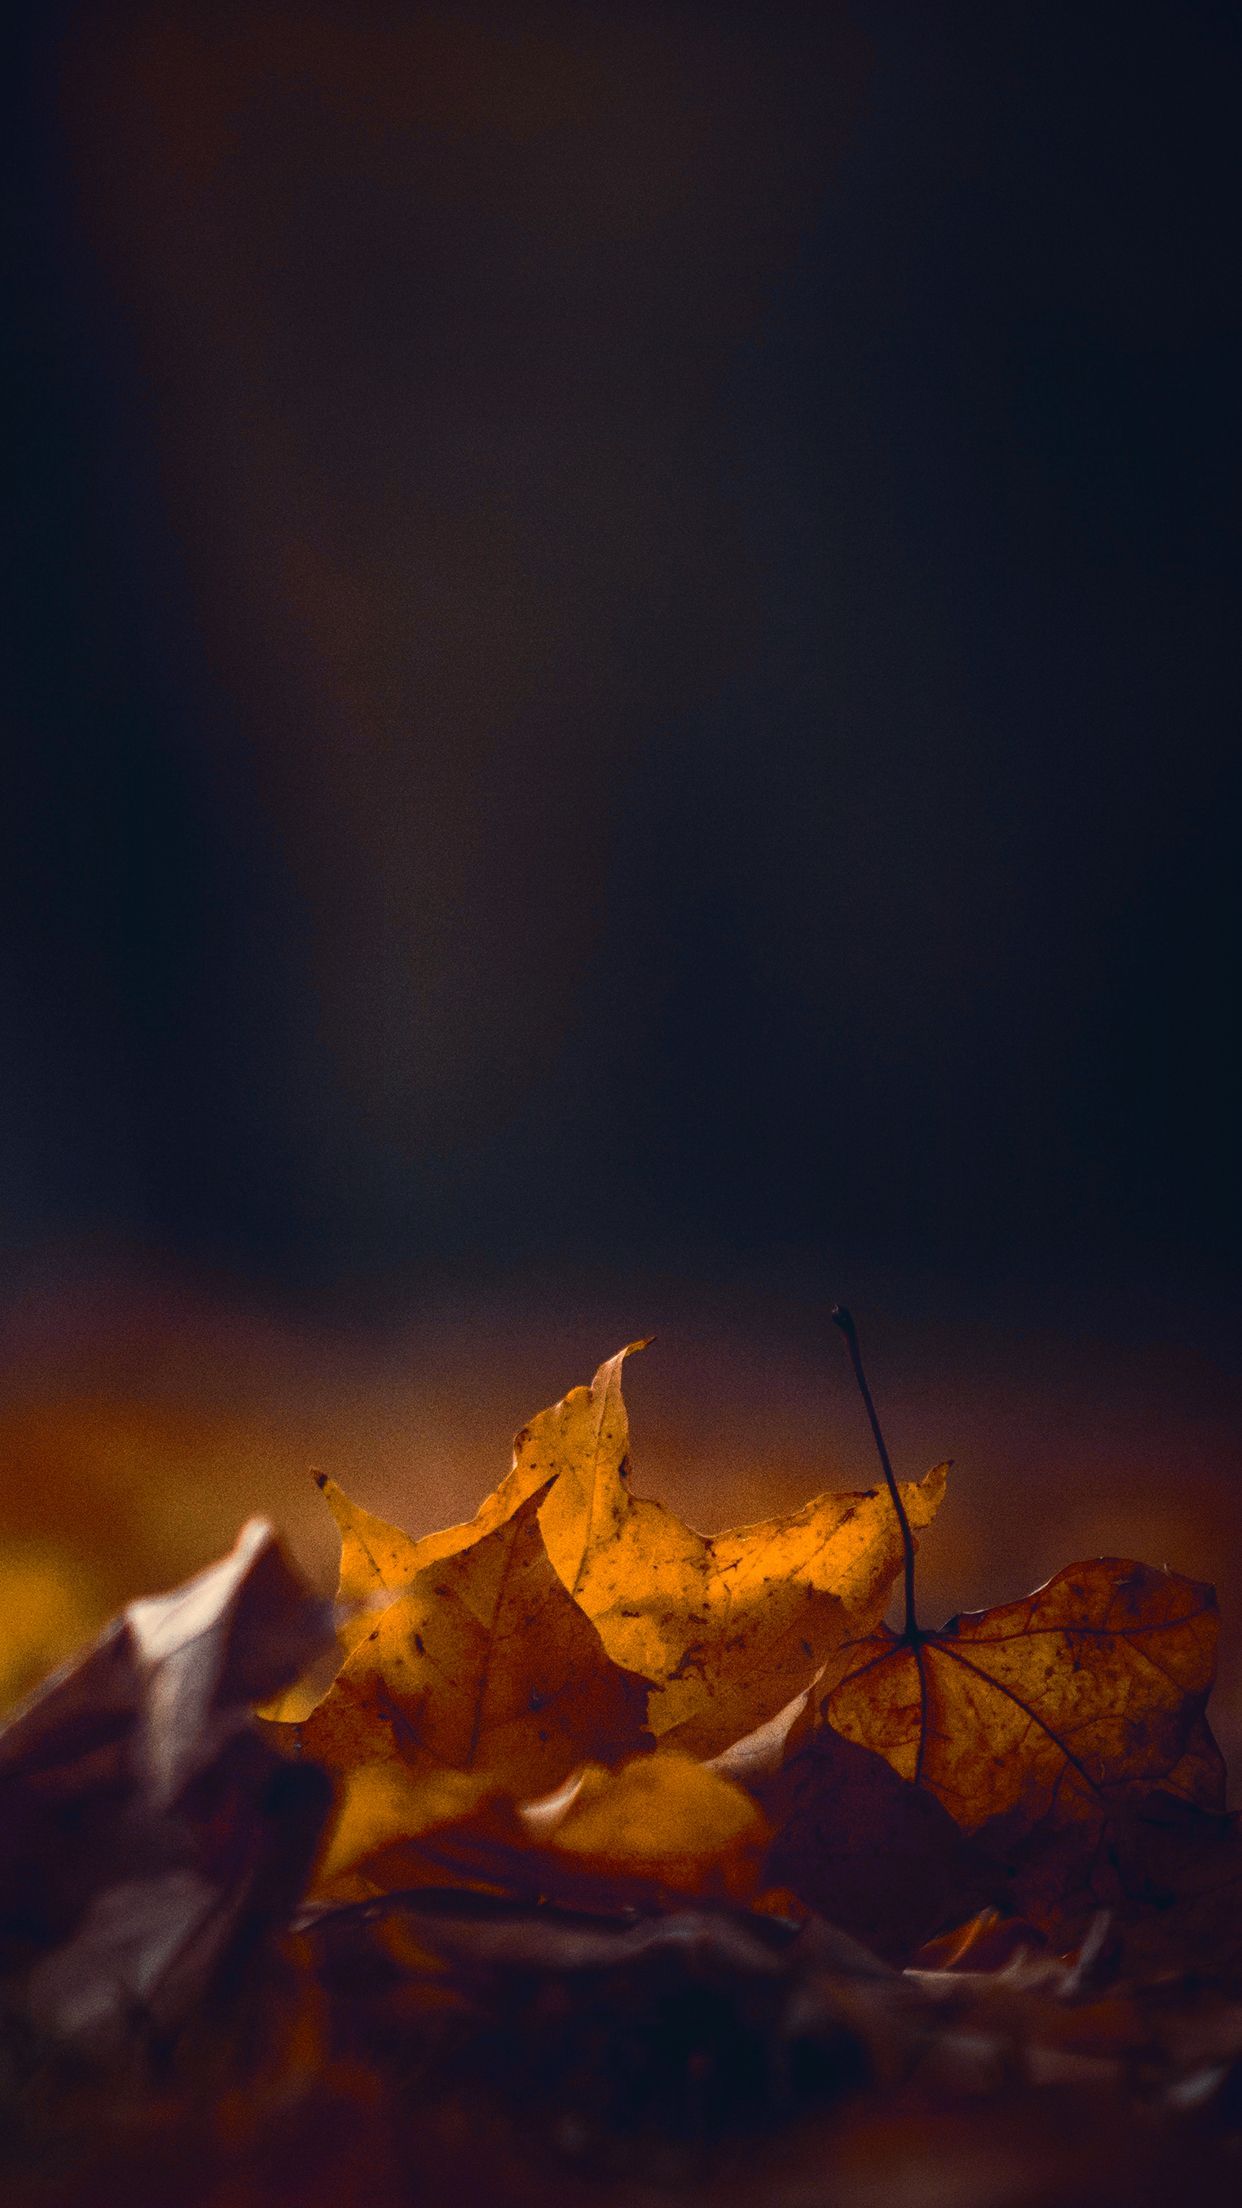 HD autumn wallpaper for your phone. iPhone background nature, Phone wallpaper, Phone wallpaper tumblr